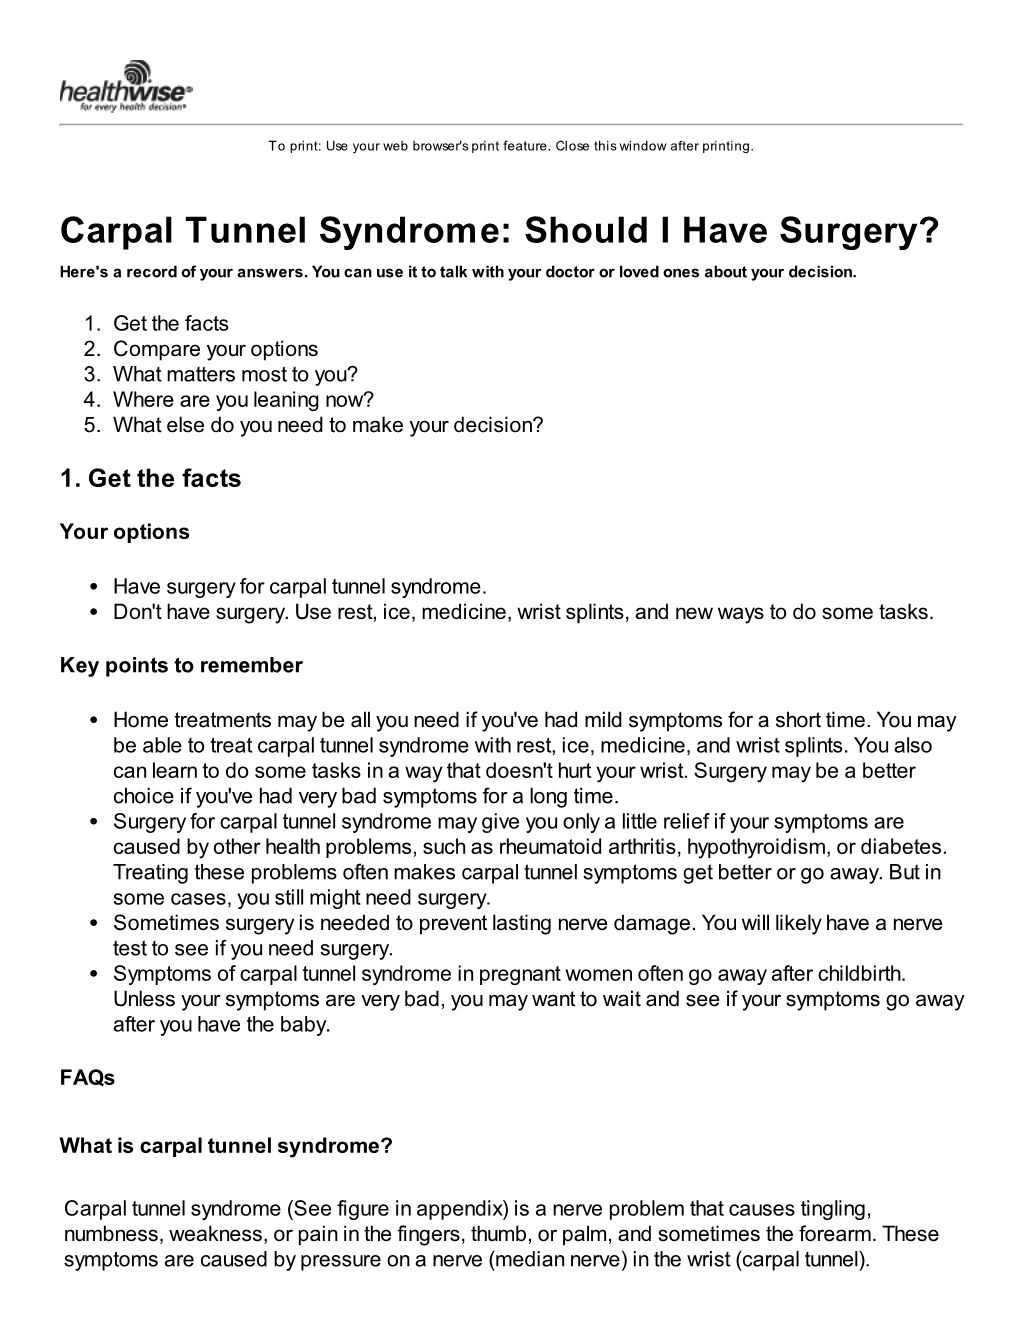 Carpal Tunnel Syndrome: Should I Have Surgery? Here's a Record of Your Answers